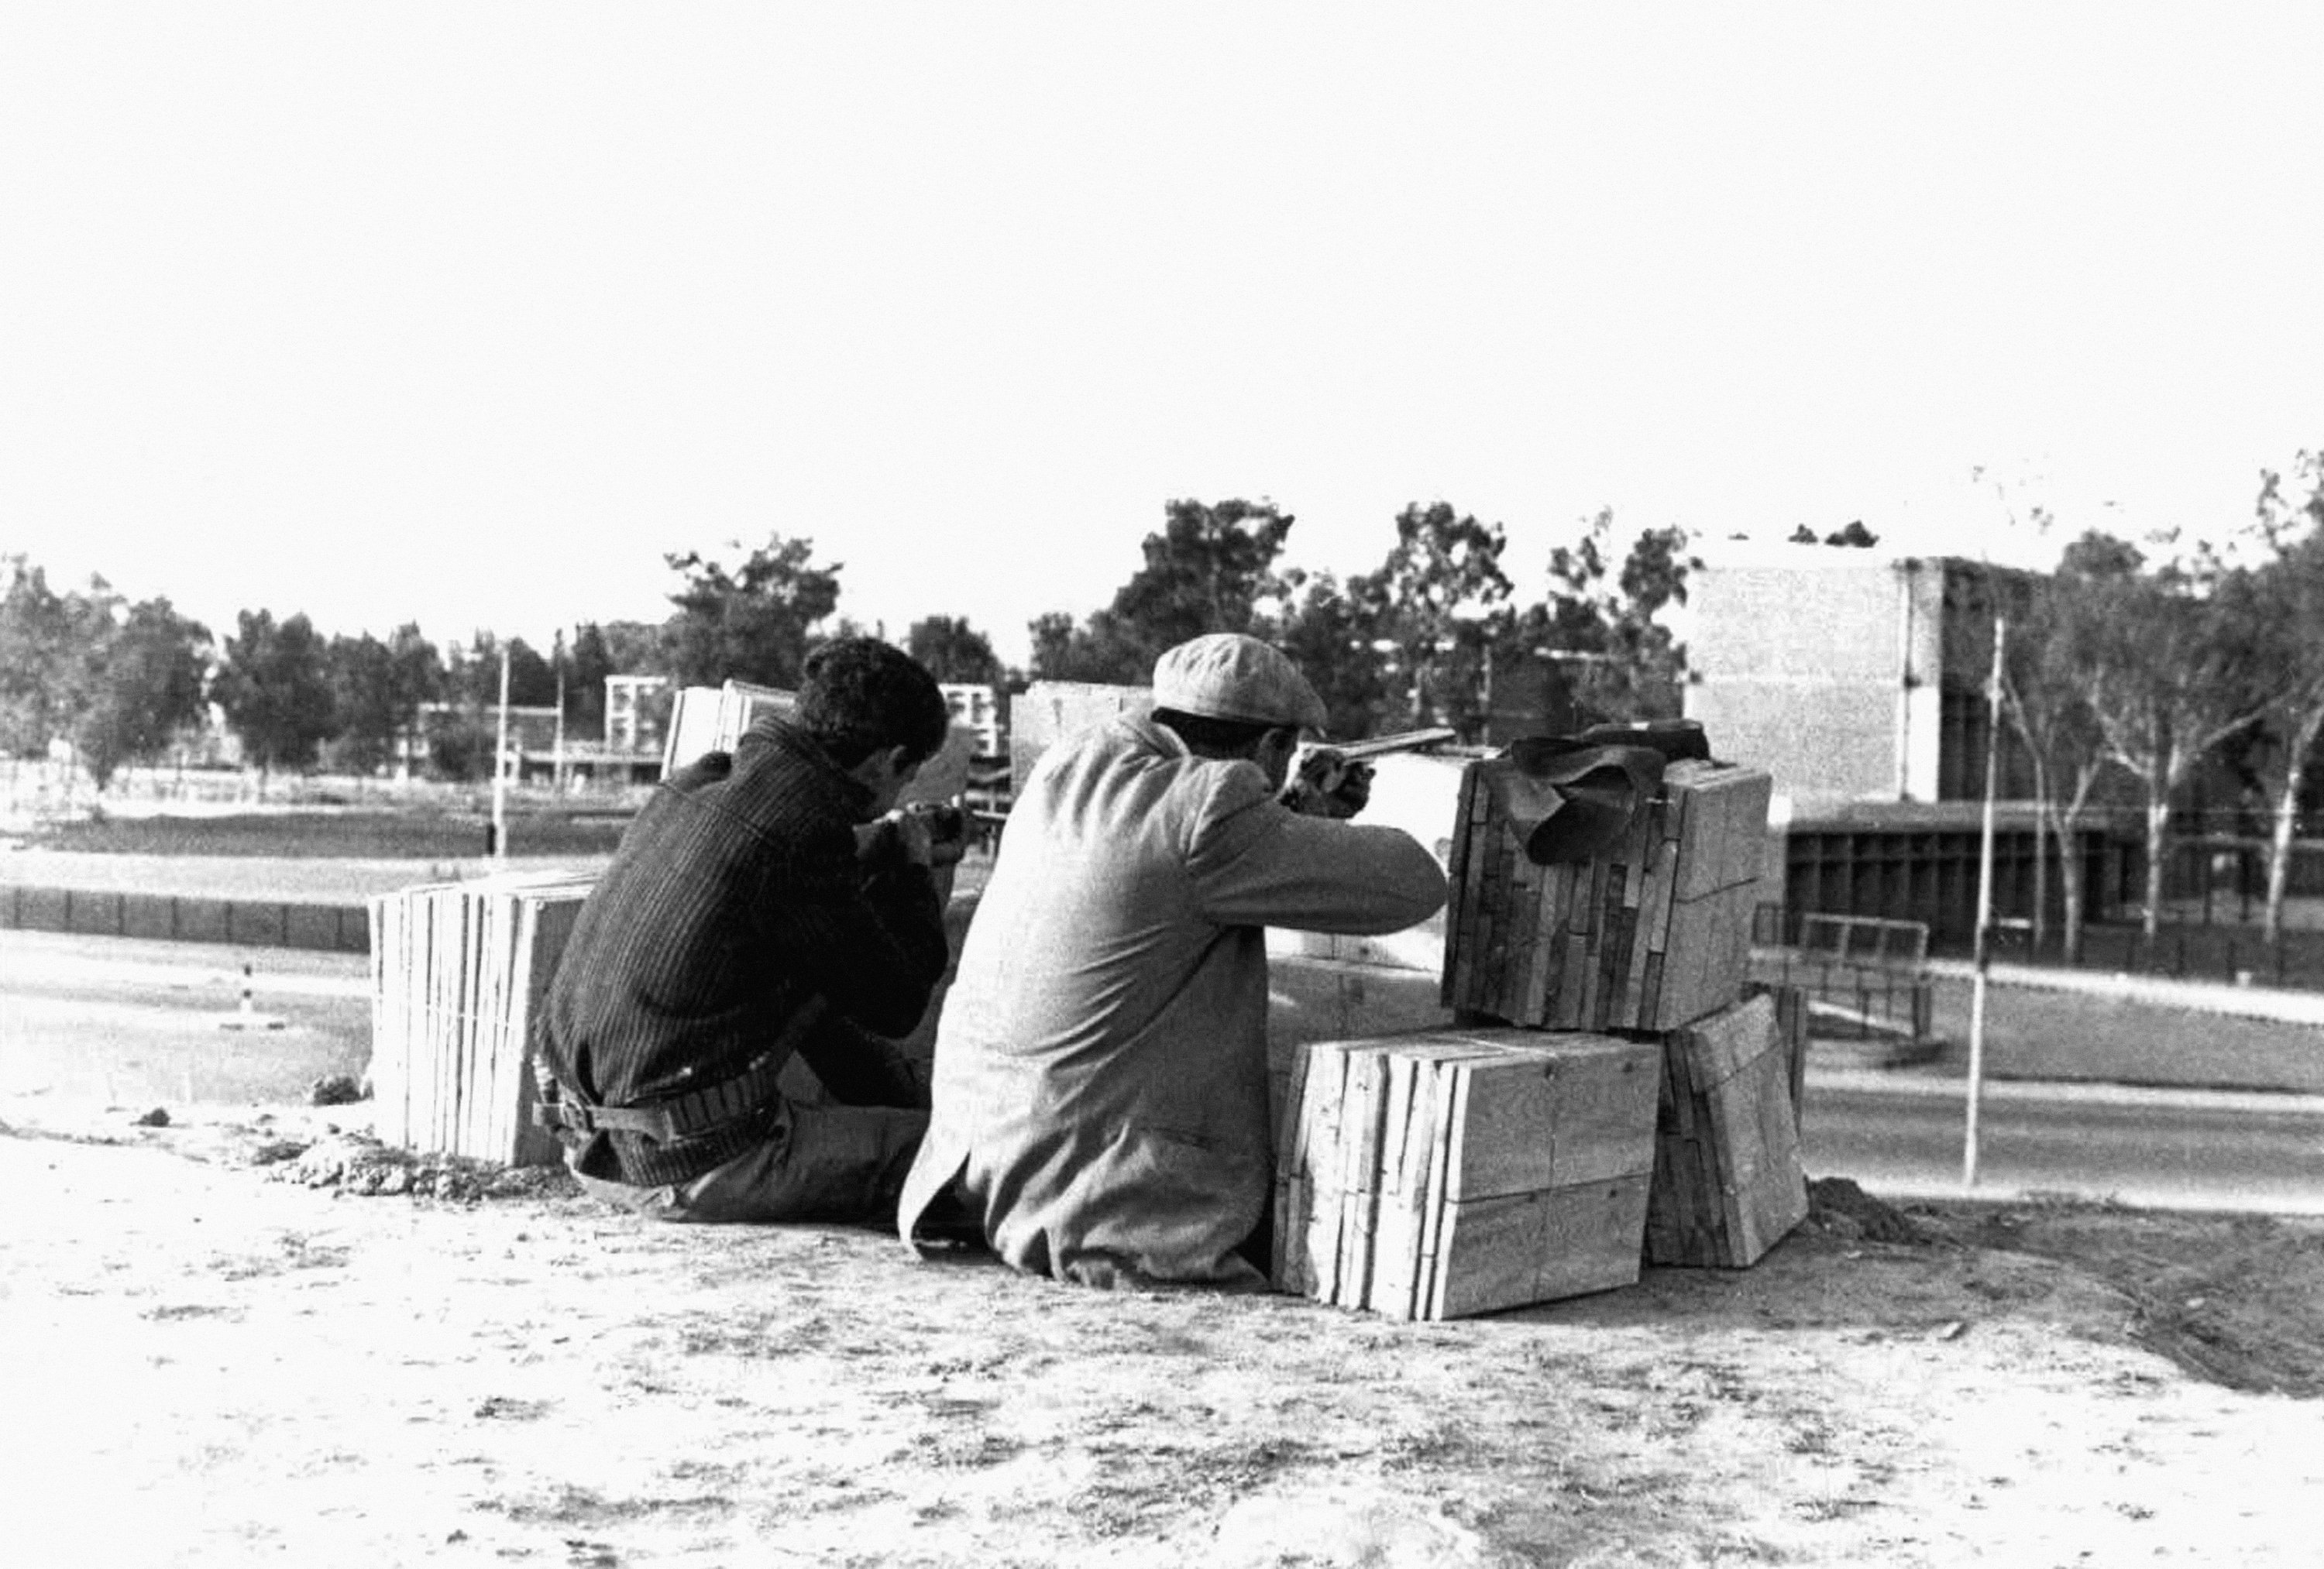 Two Turkish Cypriot civilian ‘Home Guards’ crouch with arms behind a makeshift wooden barricade on the border of the Greek and Turkish sectors of Nicosia on December 27, 1963 after the renewed outbreak of fighting in Cyprus. (AP Photo)